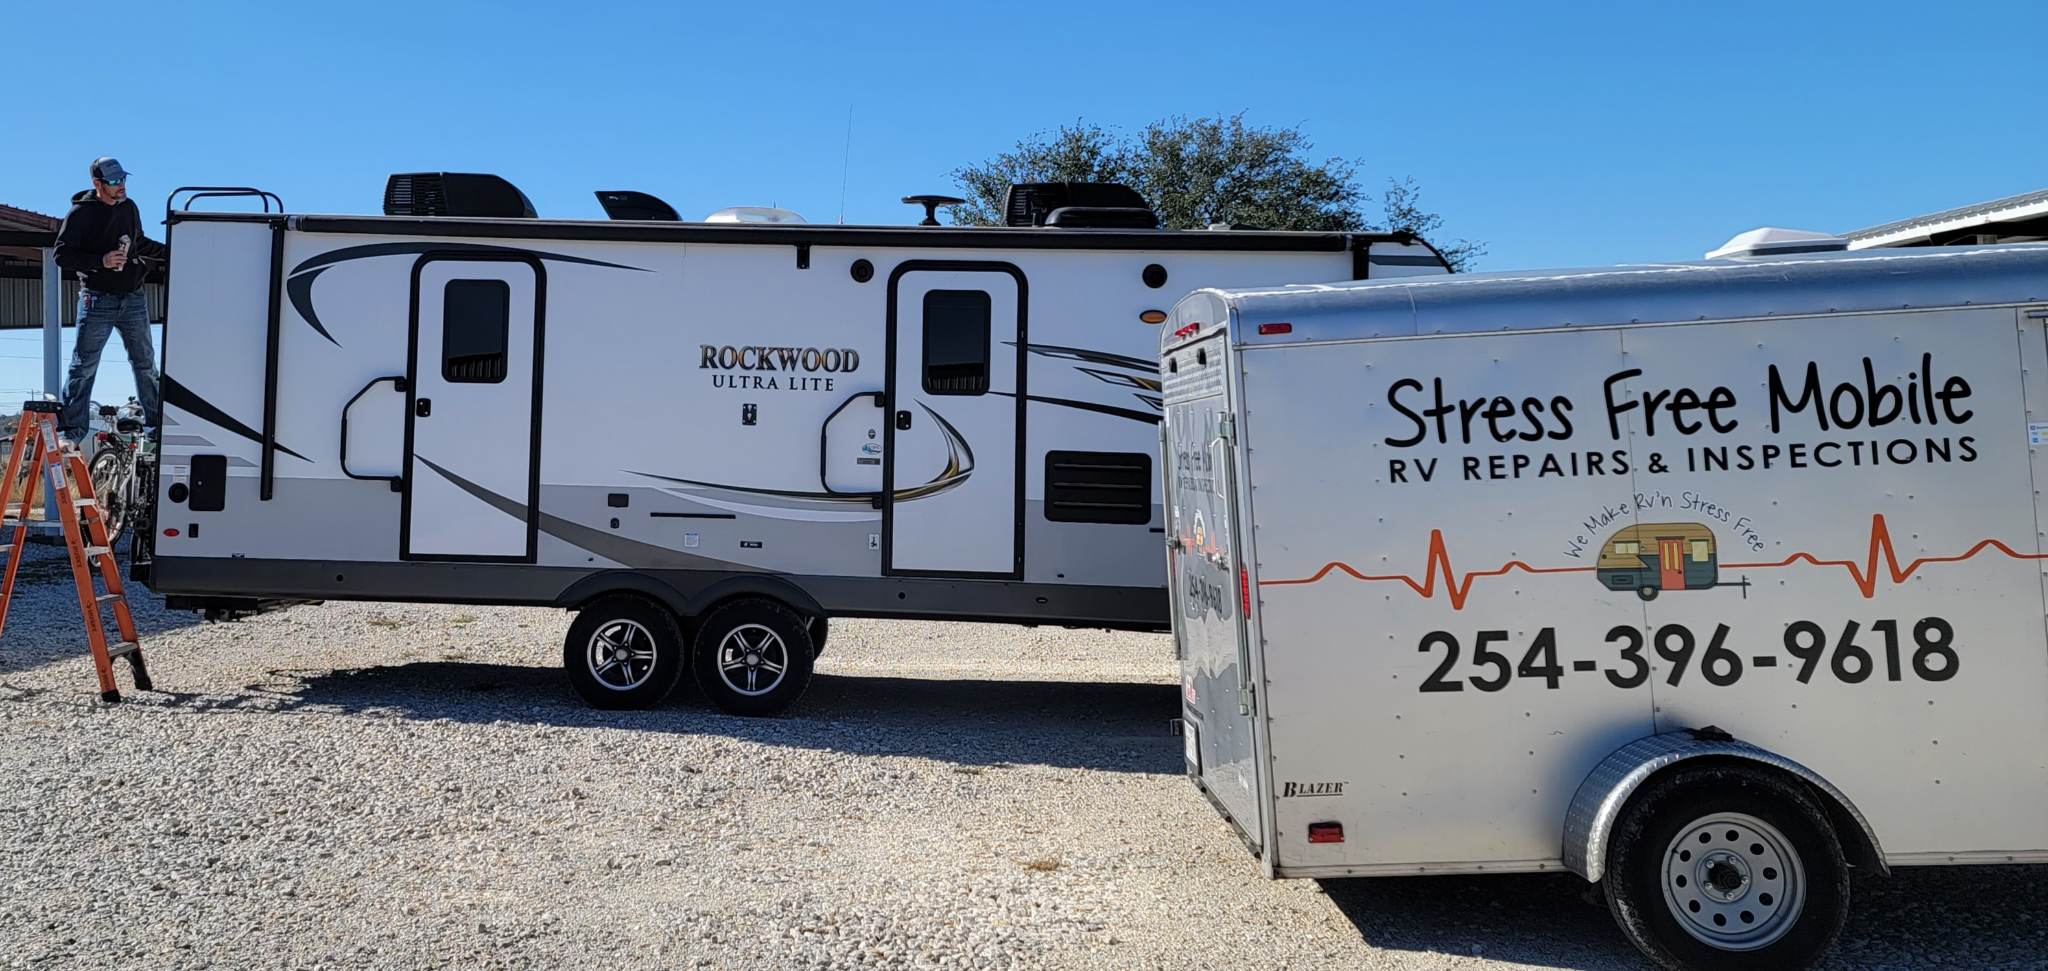 Stress Free Mobile RV Repair & Inspections